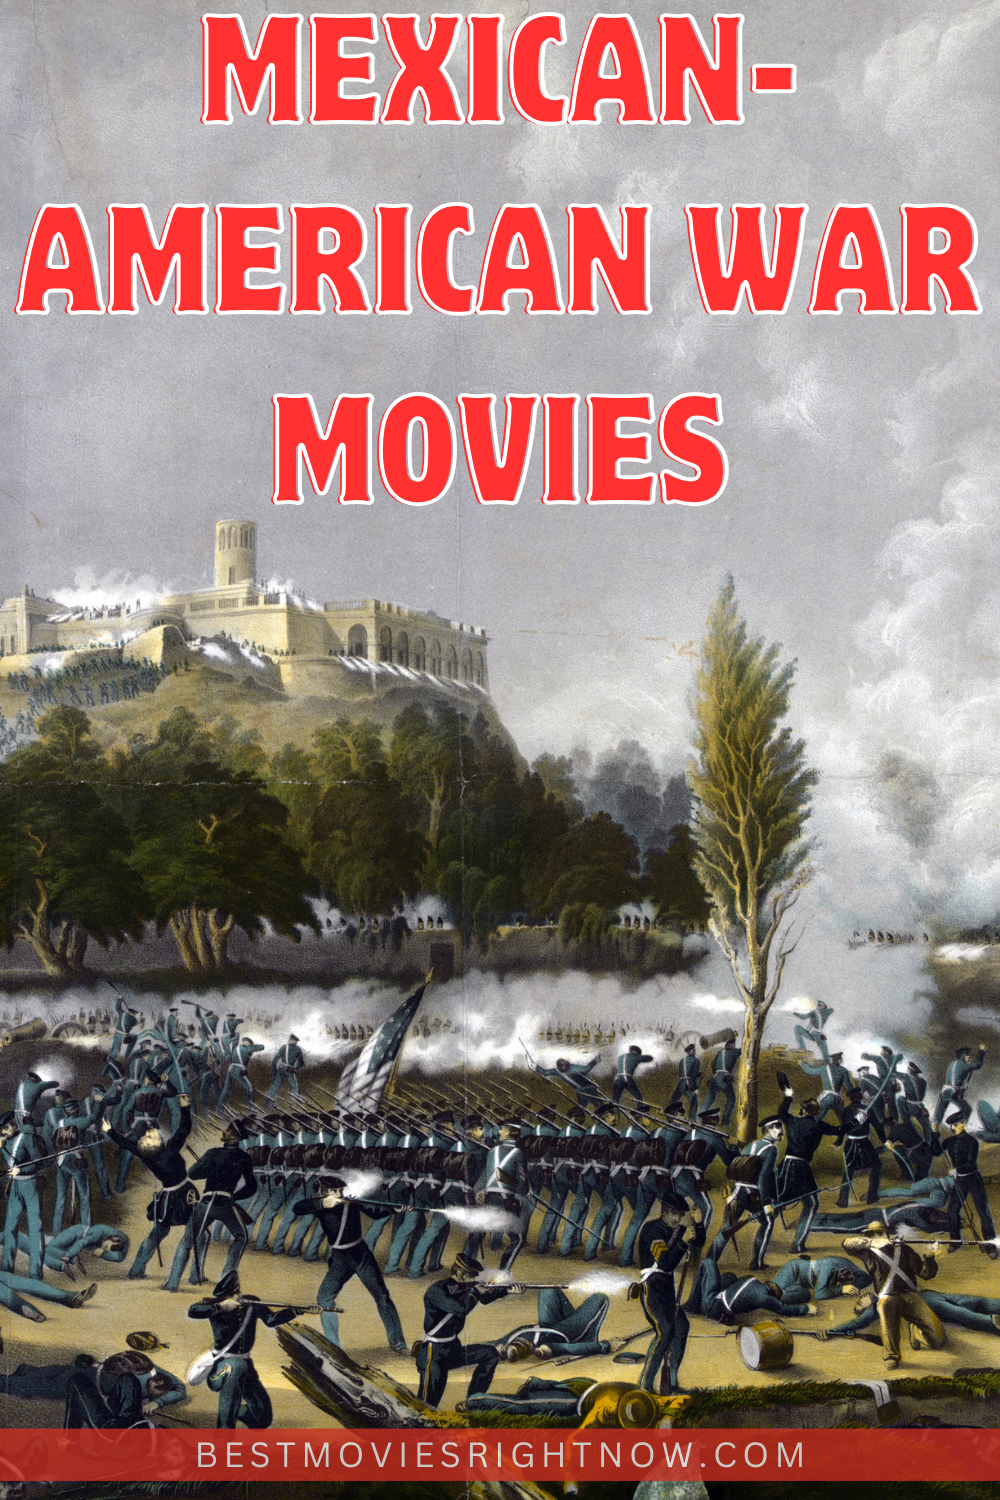 Mexican-American War. The storming of Chapultepec portrayal With text: "Mexican-American War Movies"